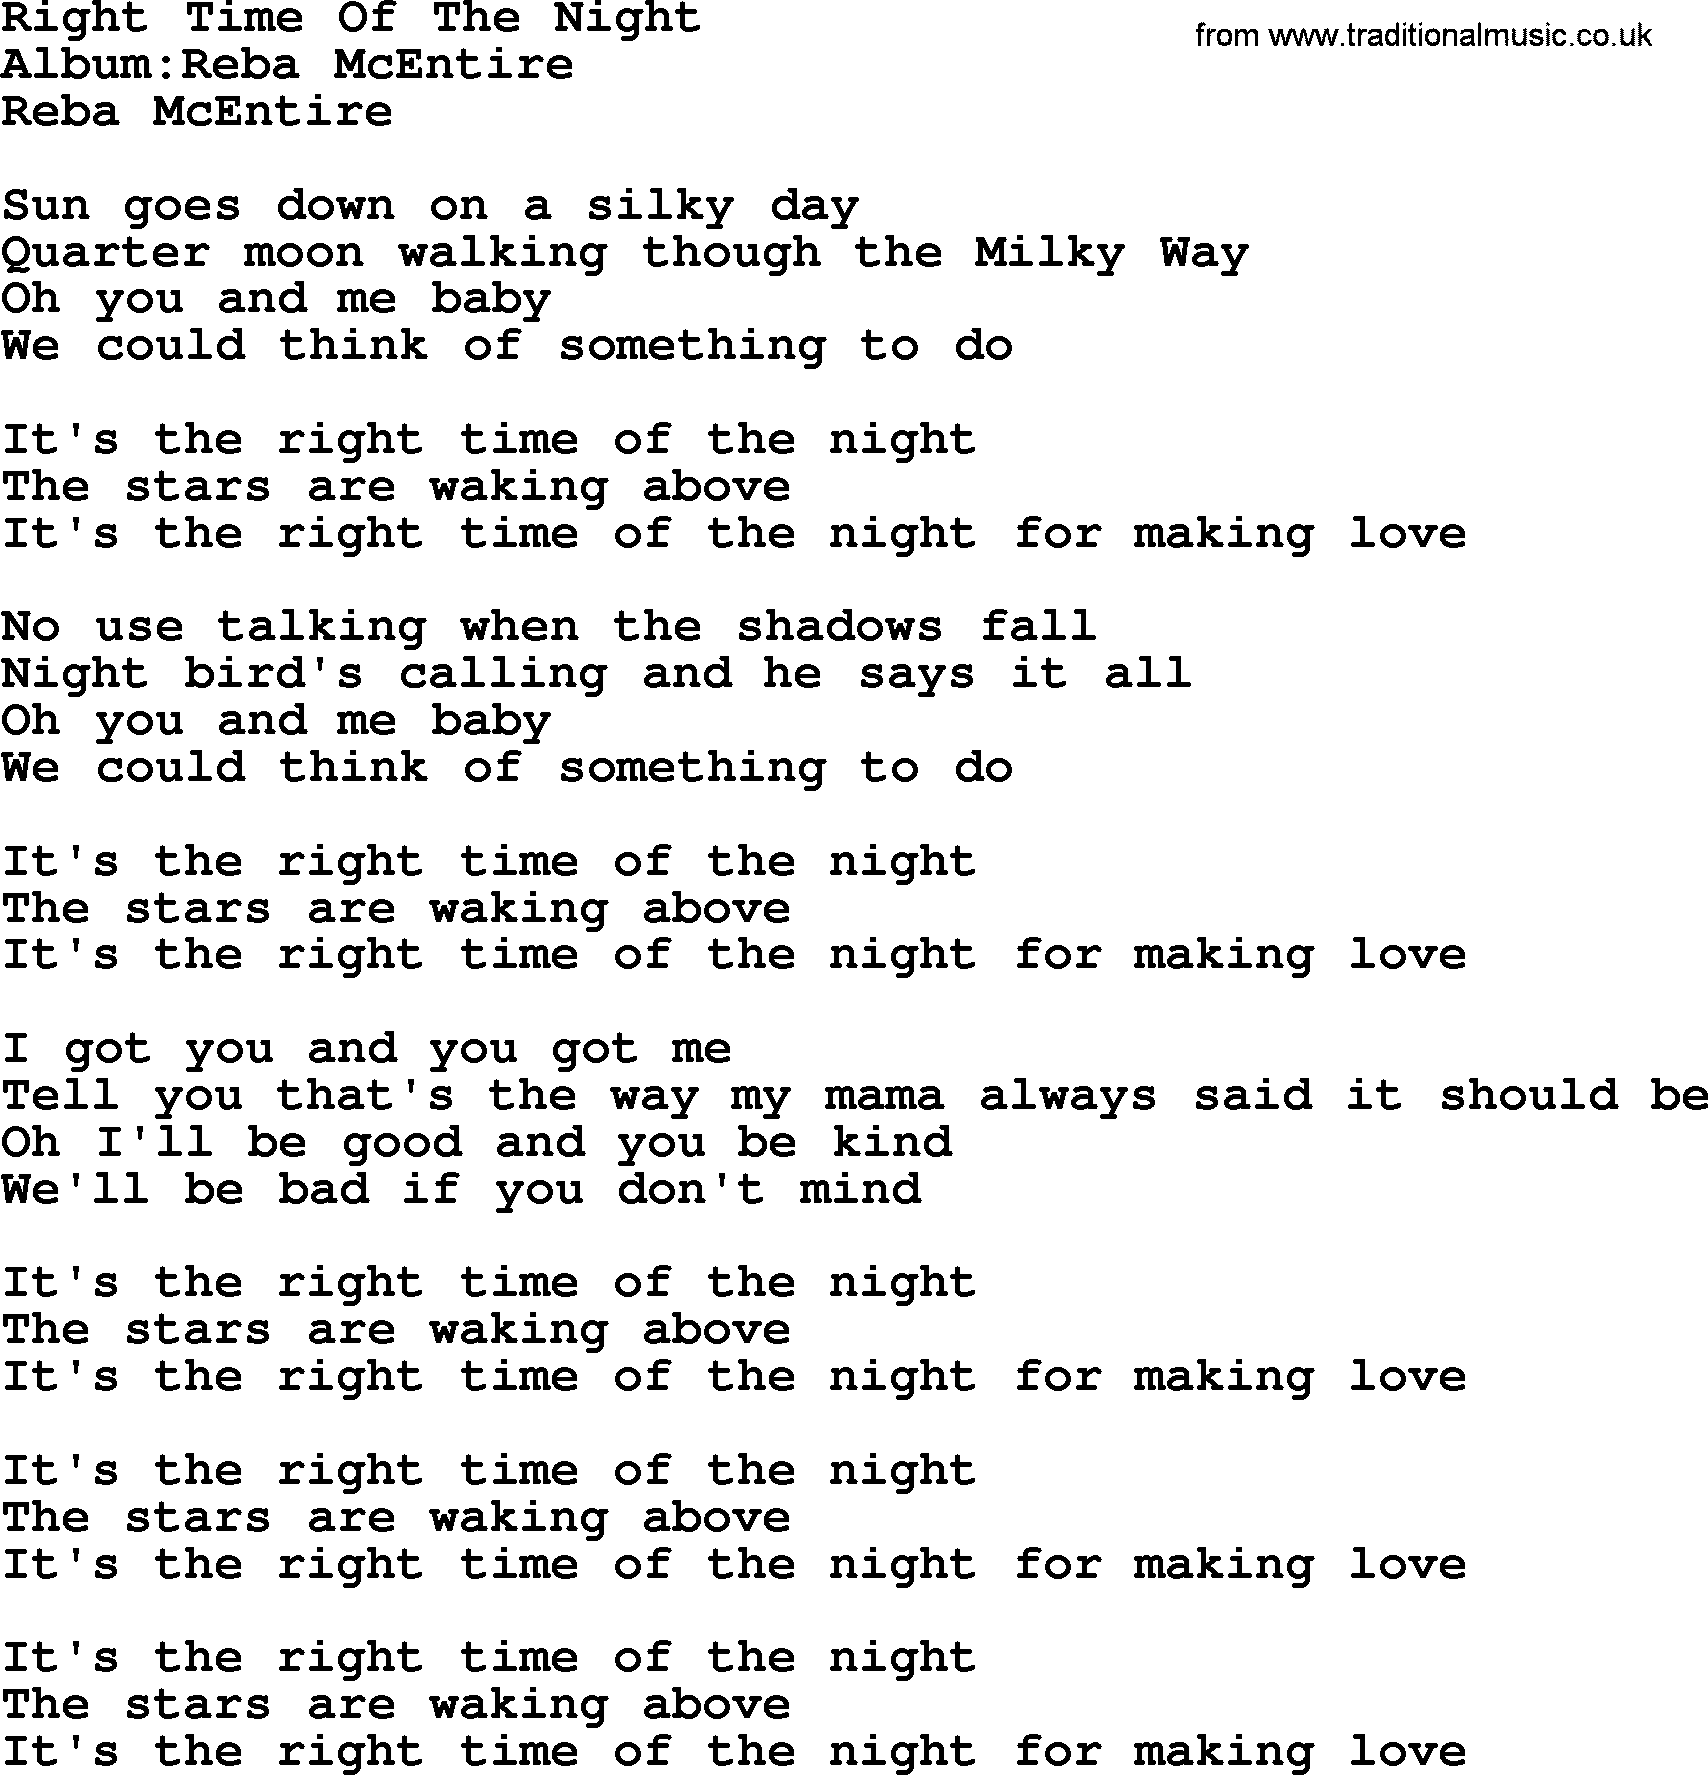 Reba McEntire song: Right Time Of The Night lyrics